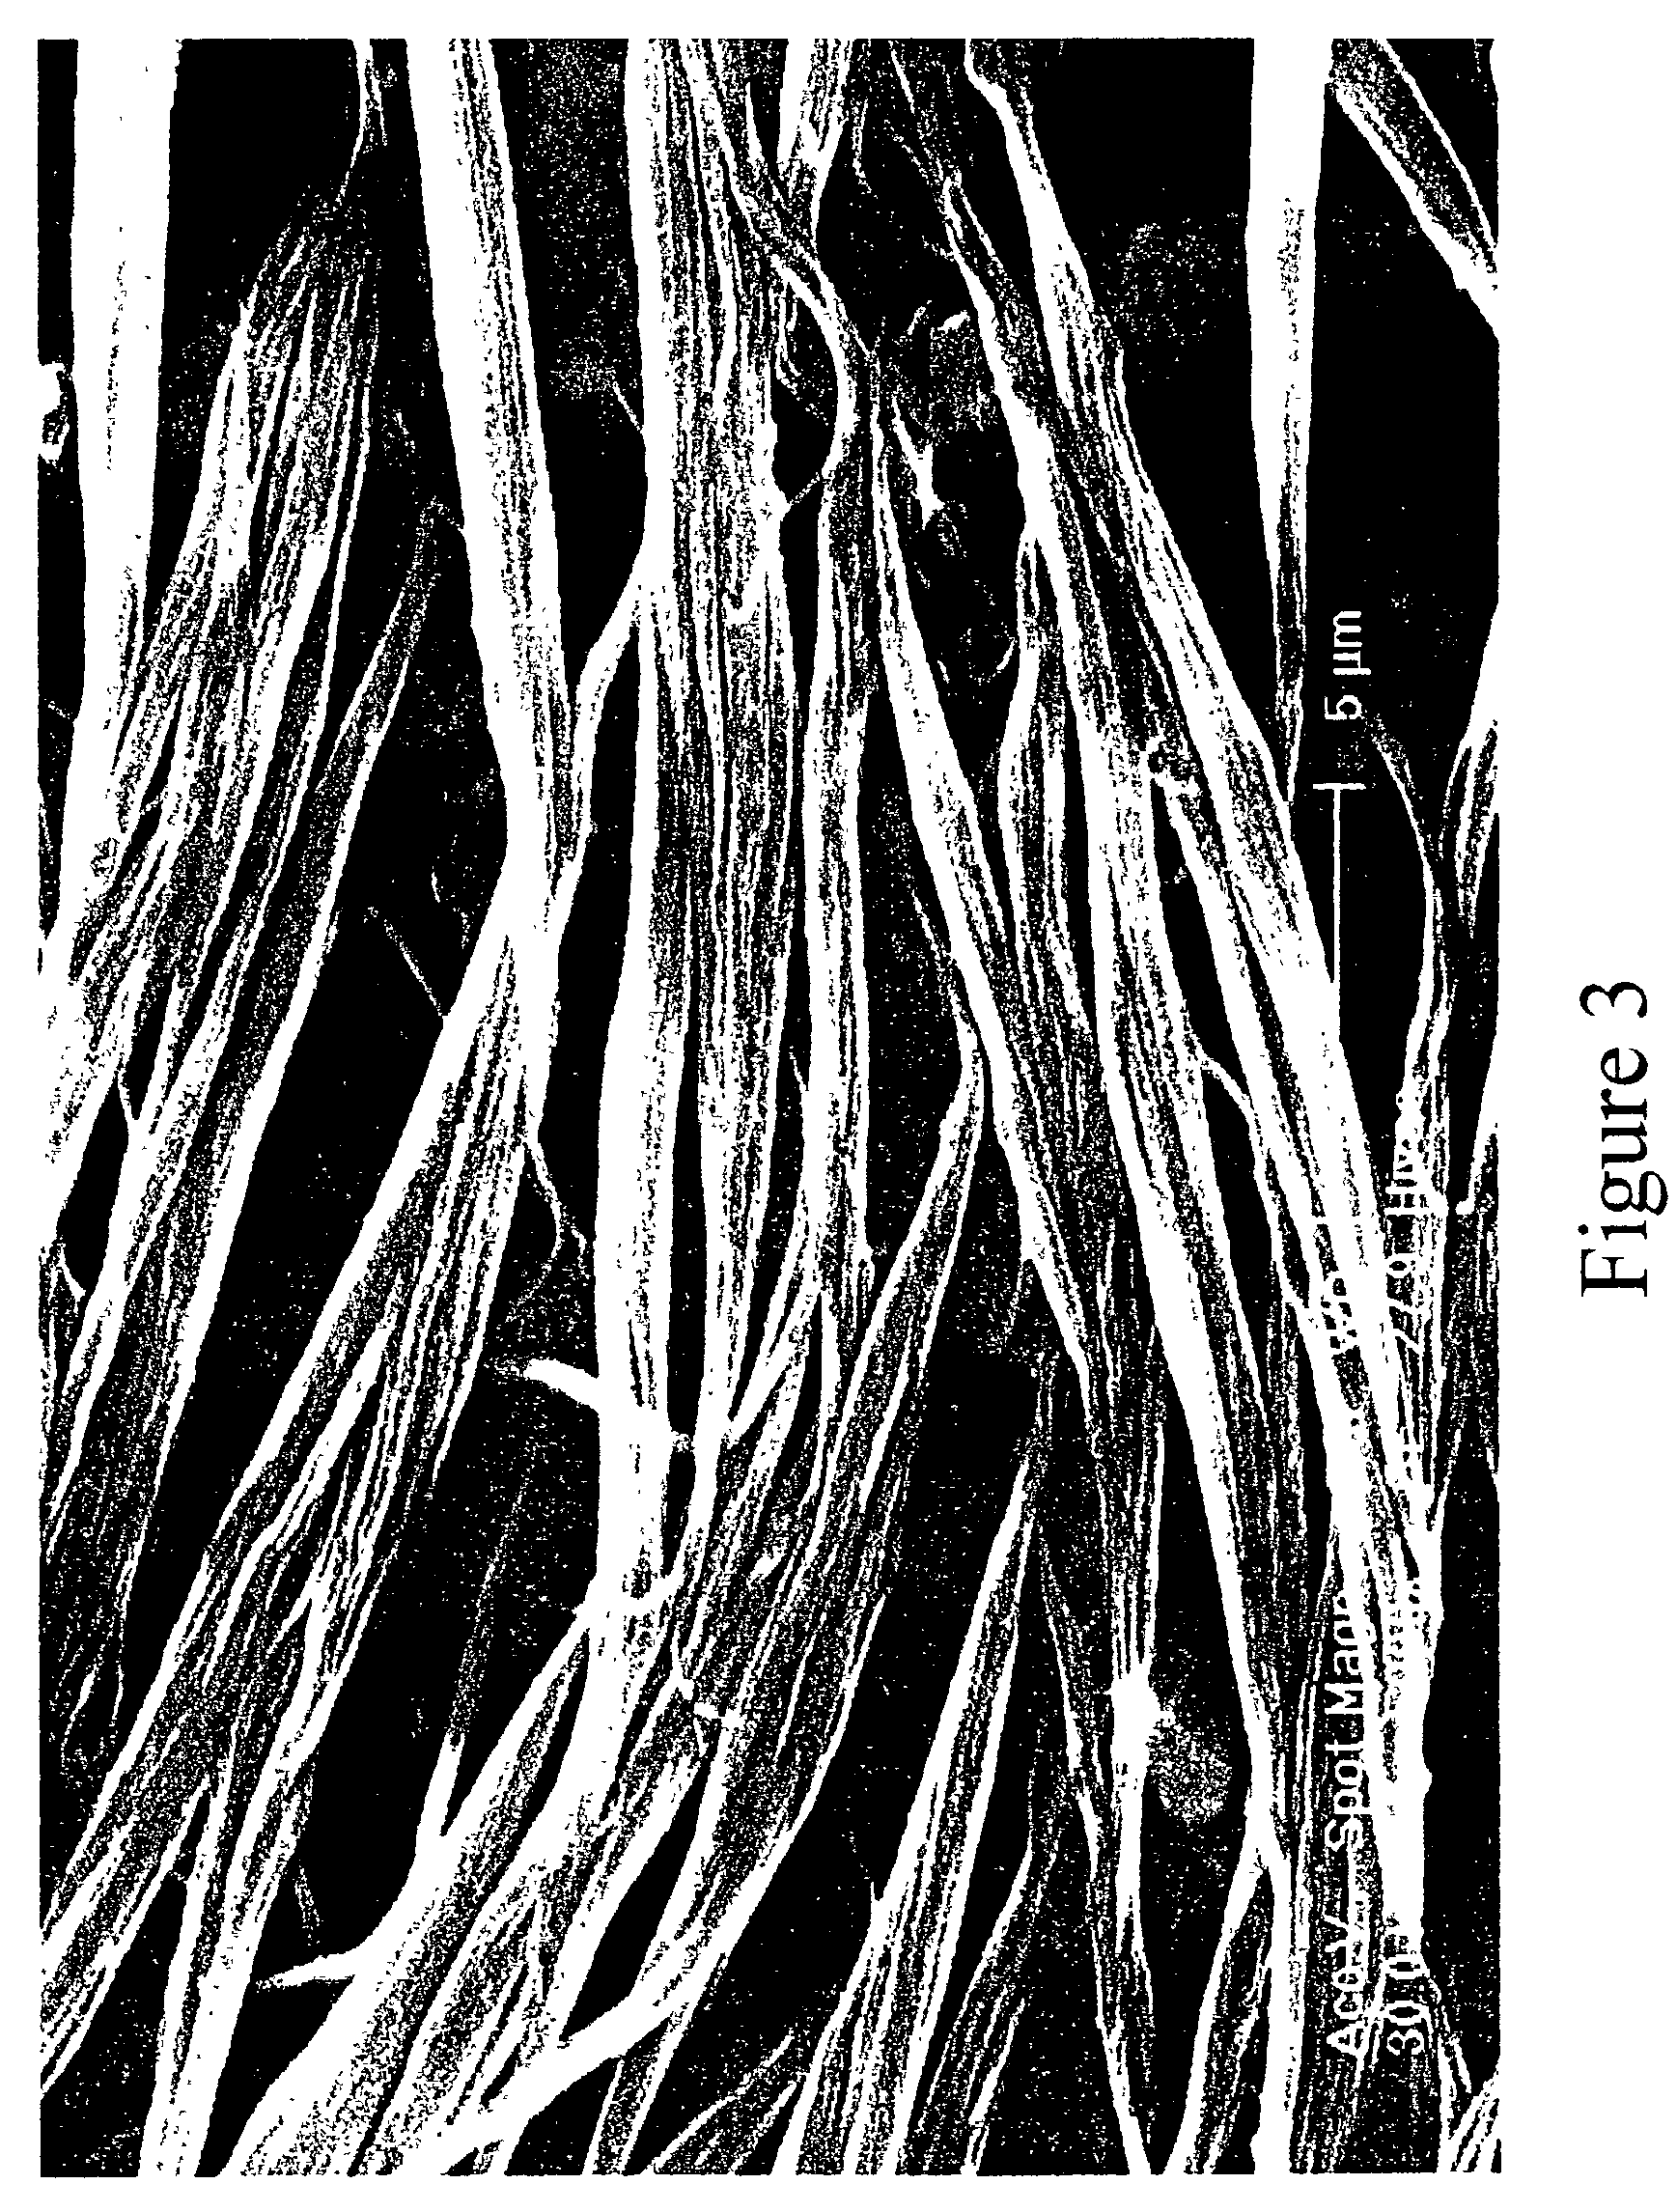 Single-wall carbon nanotube alewives, process for making, and compositions thereof